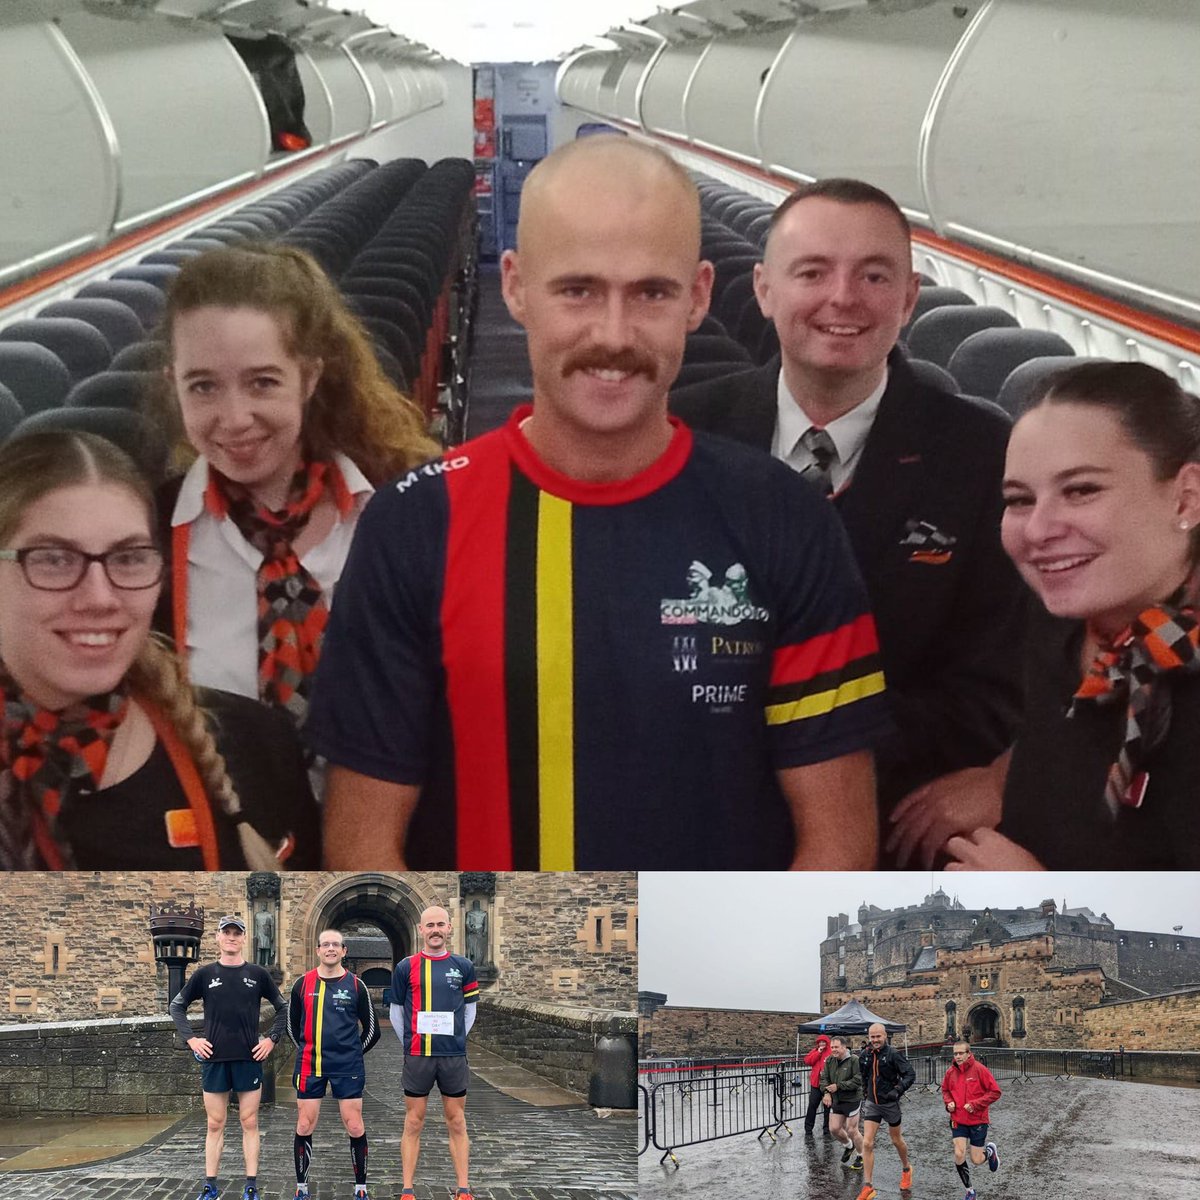 That’s 50 marathons in 50 days for the running Marine - just 10 to go. He is now enjoying the Scottish weather with @RMRScotland @45CdoGp and @43Commando. Thanks to @easyJet for the shout out on the plane. Sponsored by @PatronCapital & @PrimeHealthUK supported by @ForcesMutual